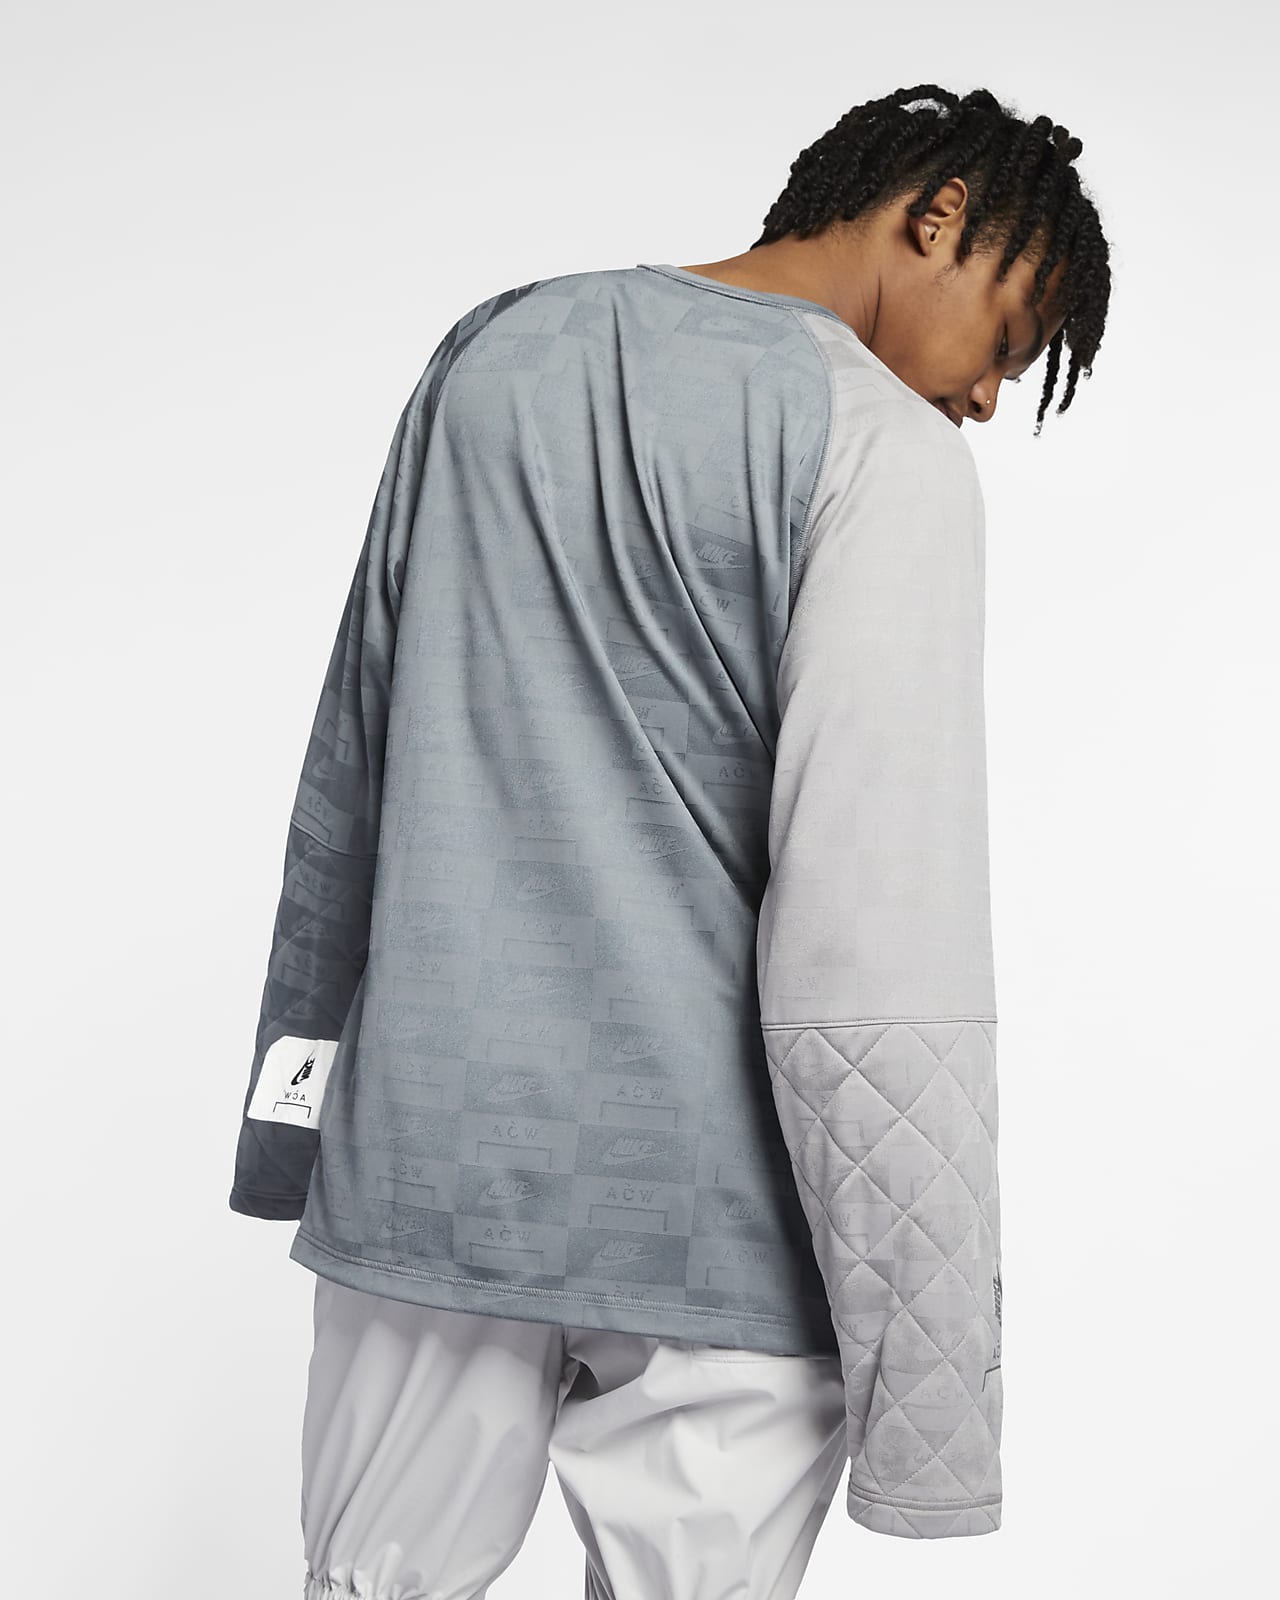 Nike x A-COLD-WALL* Men’s Long-Sleeve Top